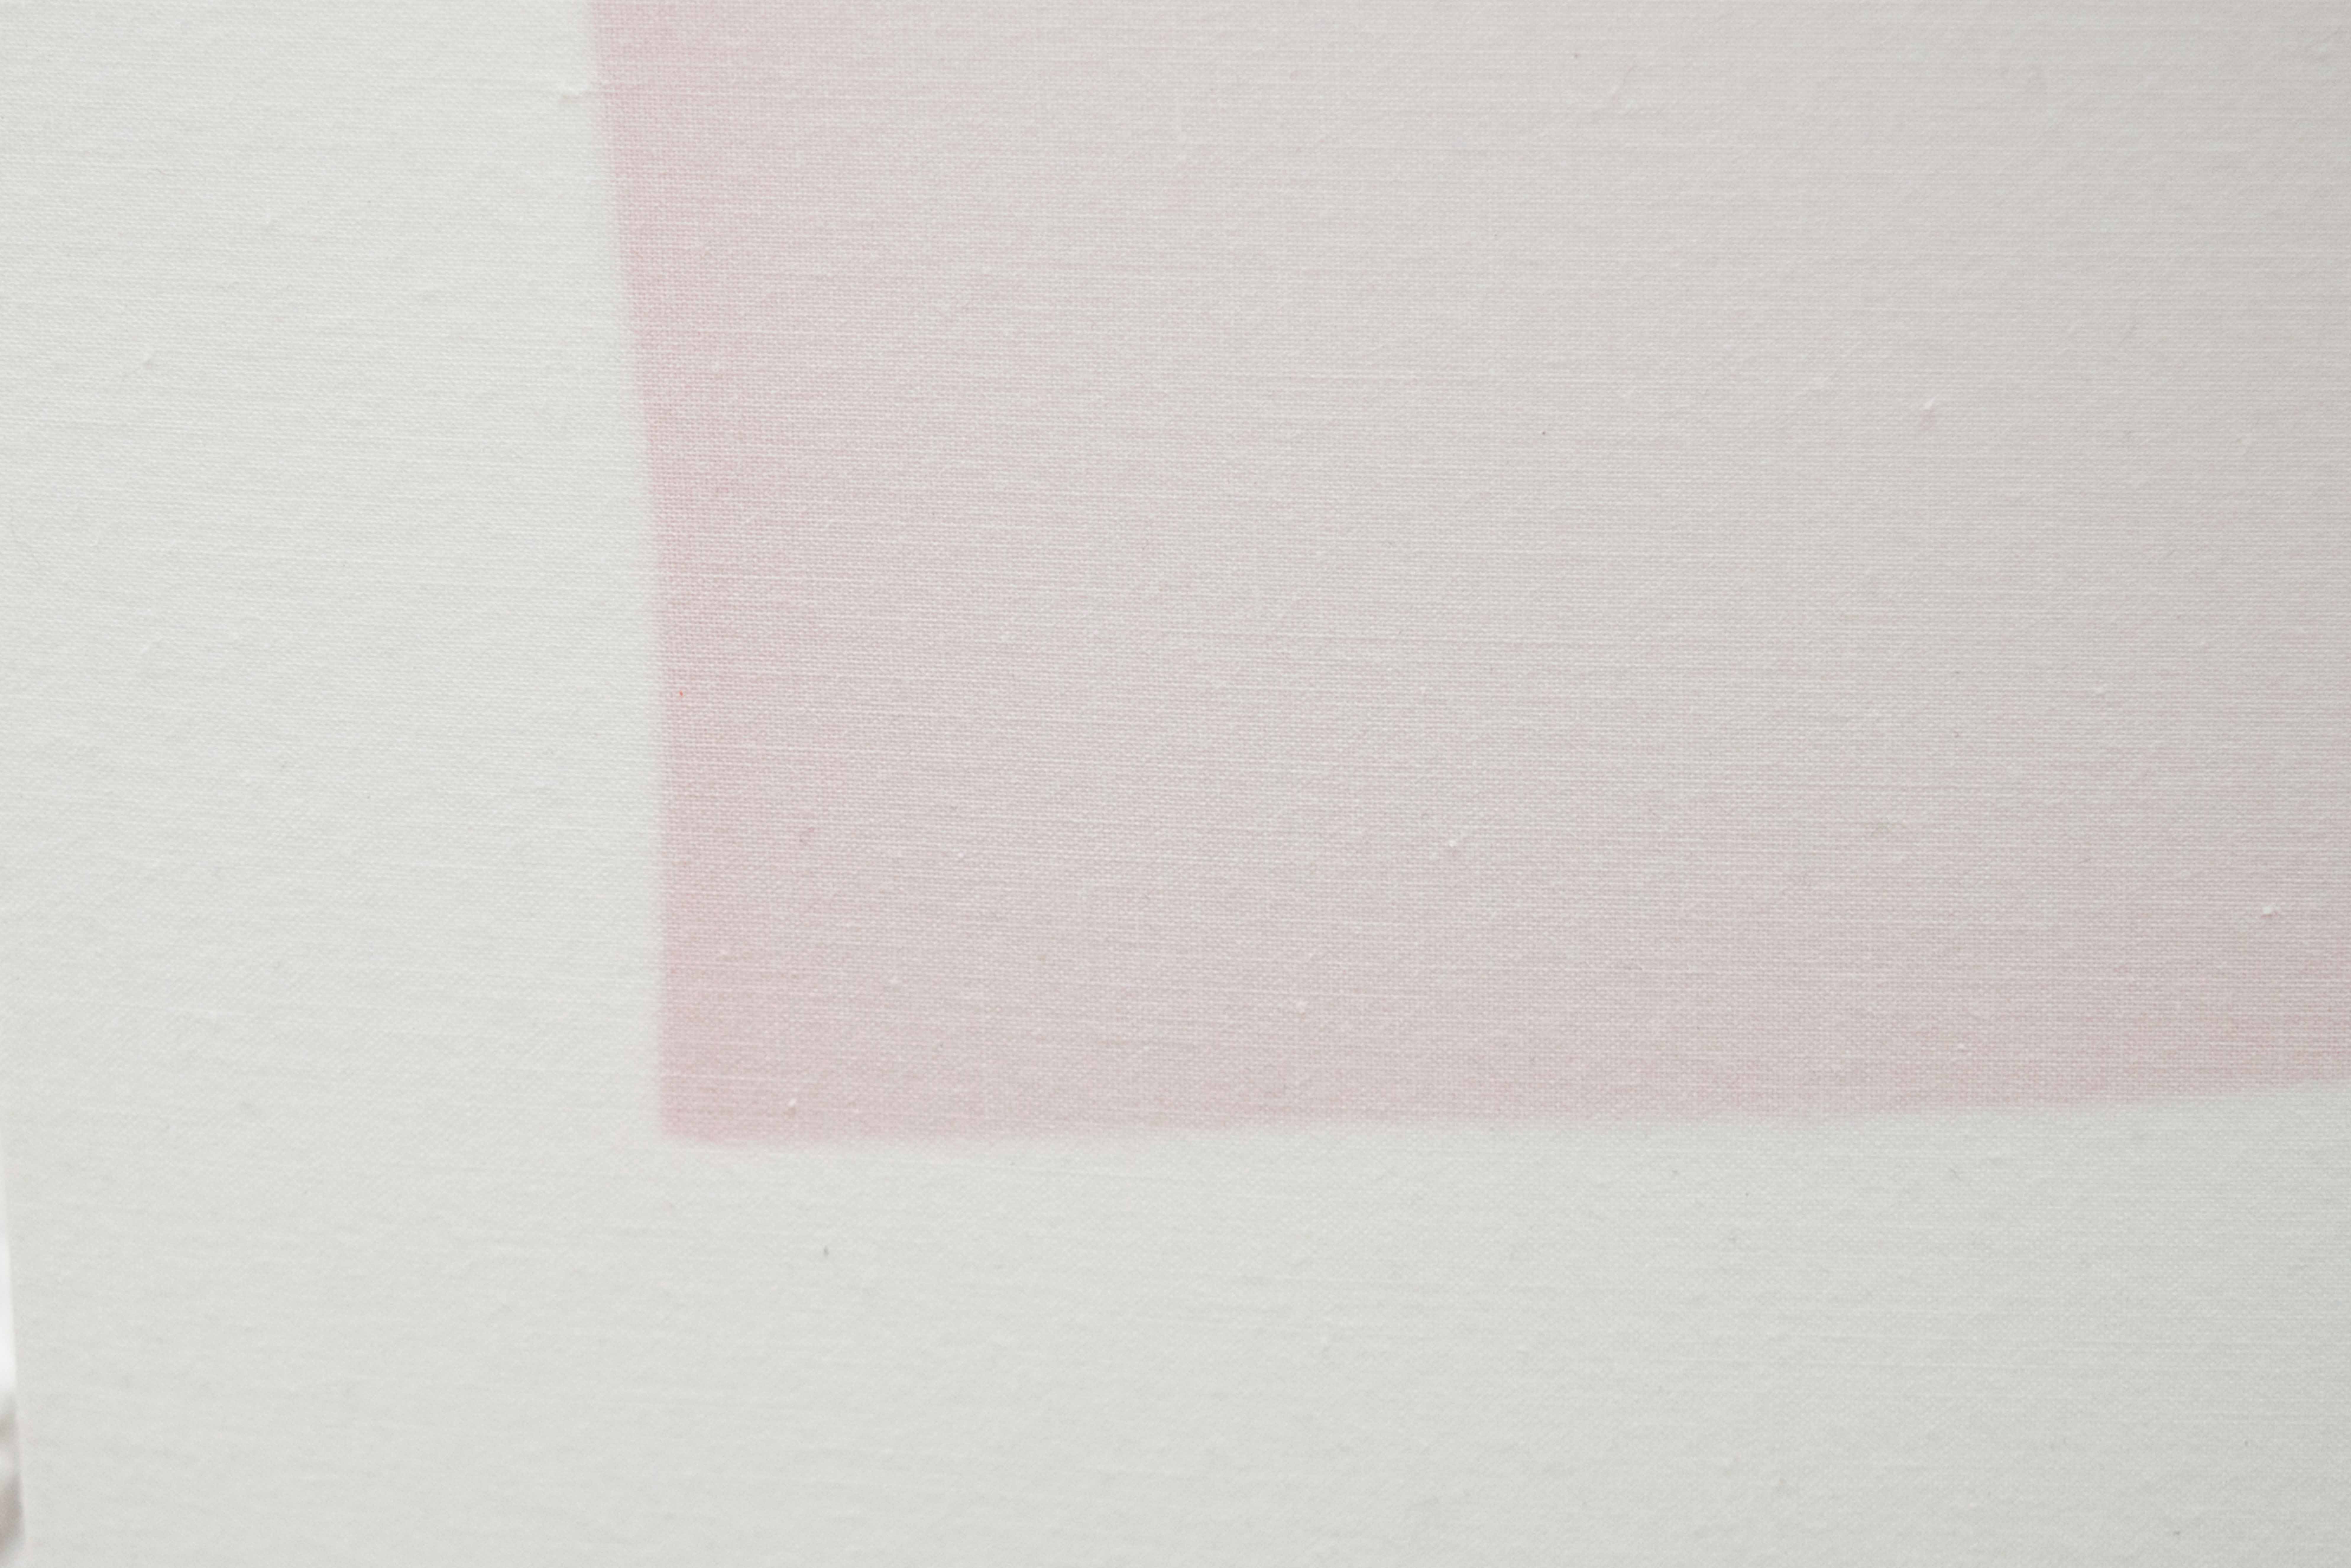 Pale pink rectangular shape against a white background